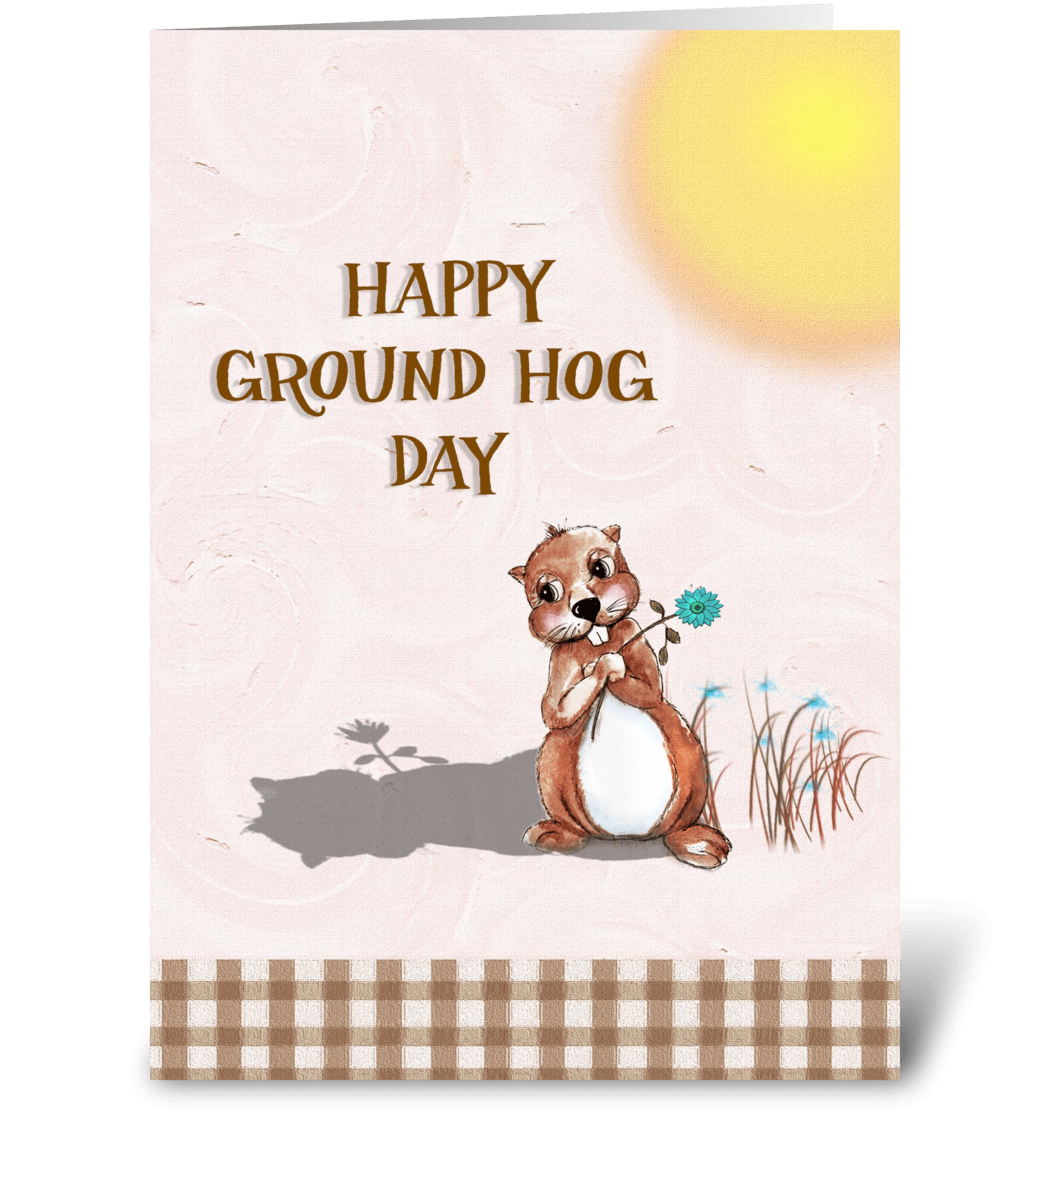 groundhog-day-send-this-greeting-card-designed-by-mscardsharque